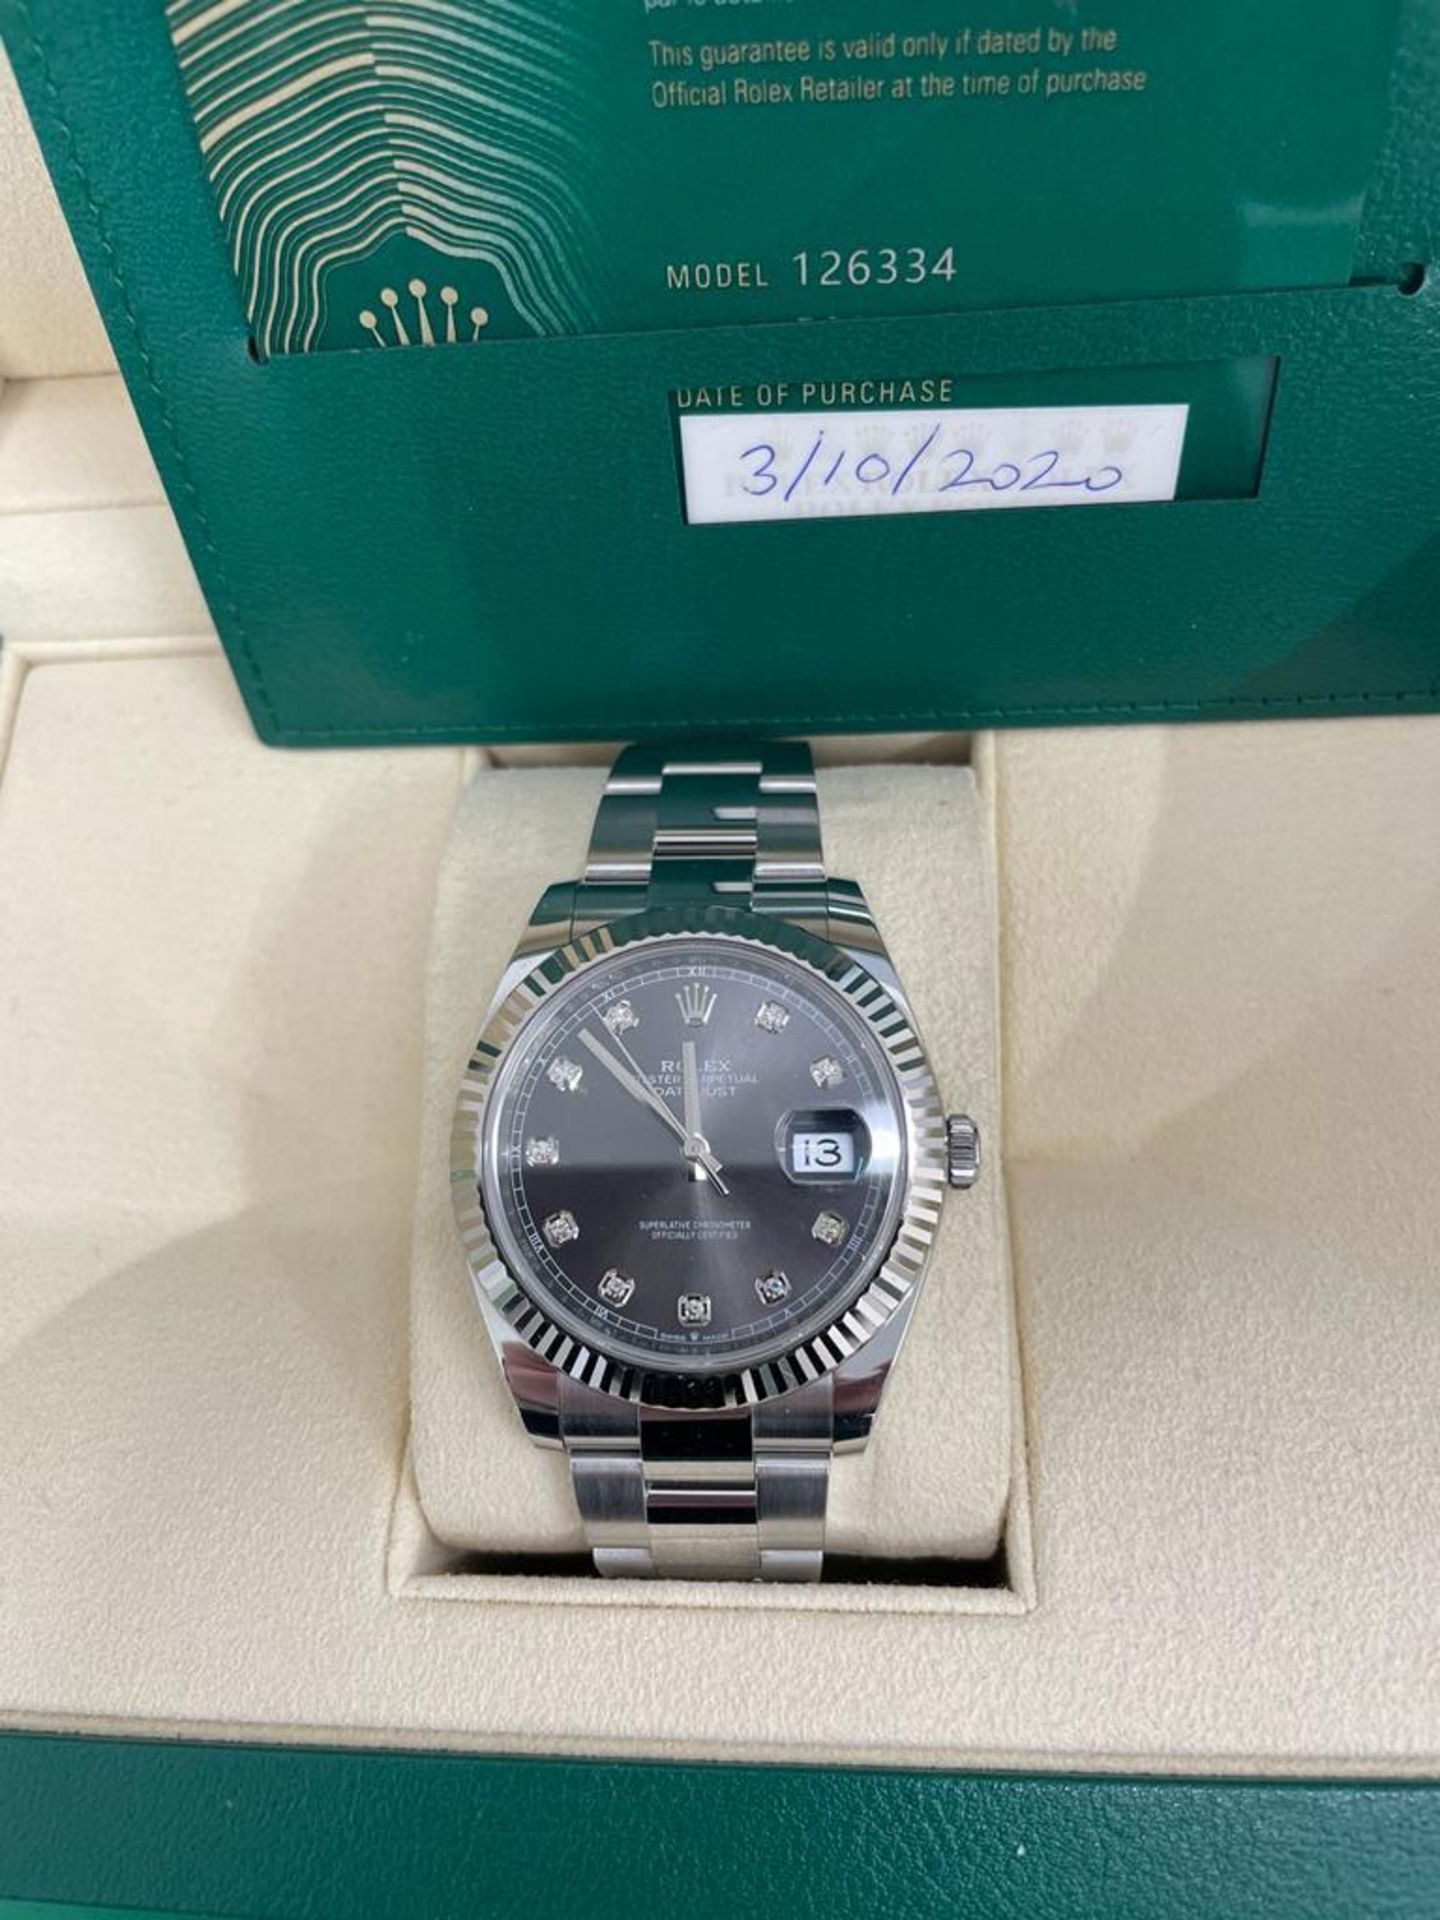 A ROLEX DATEJUST 40 MM WRIST WATCH WITH STAINLESS STEEL CASE, OYSTER STAINLESS STEEL BRACELET, - Image 3 of 4